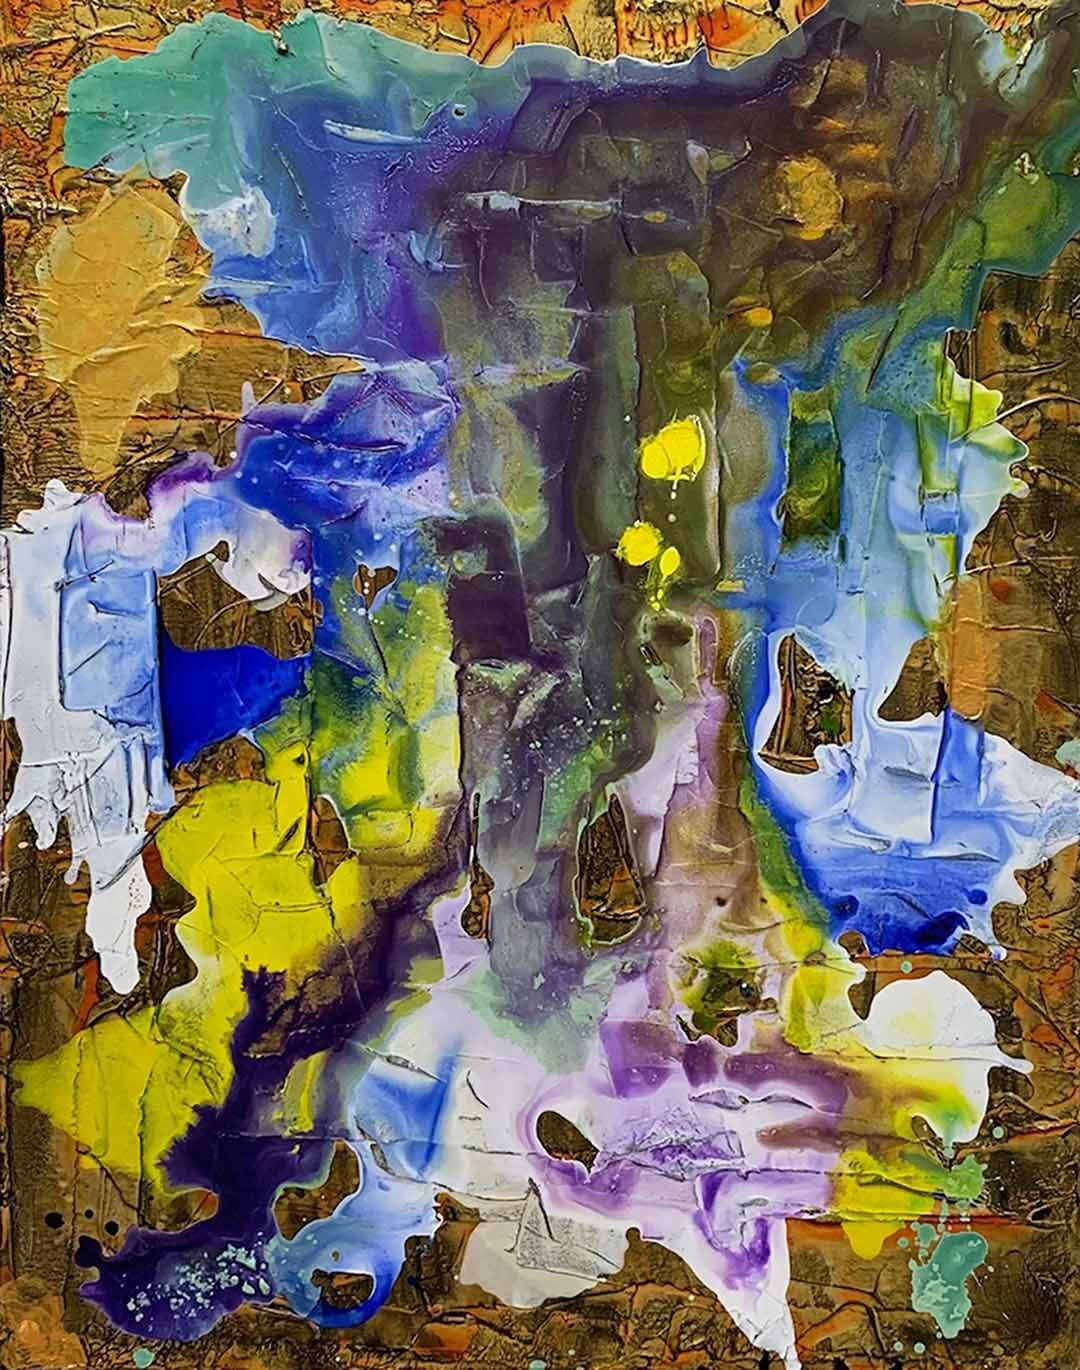 An abstract painting by Eduardo Lapentia featuring paint in purple, yellow/gold, browns, and some green